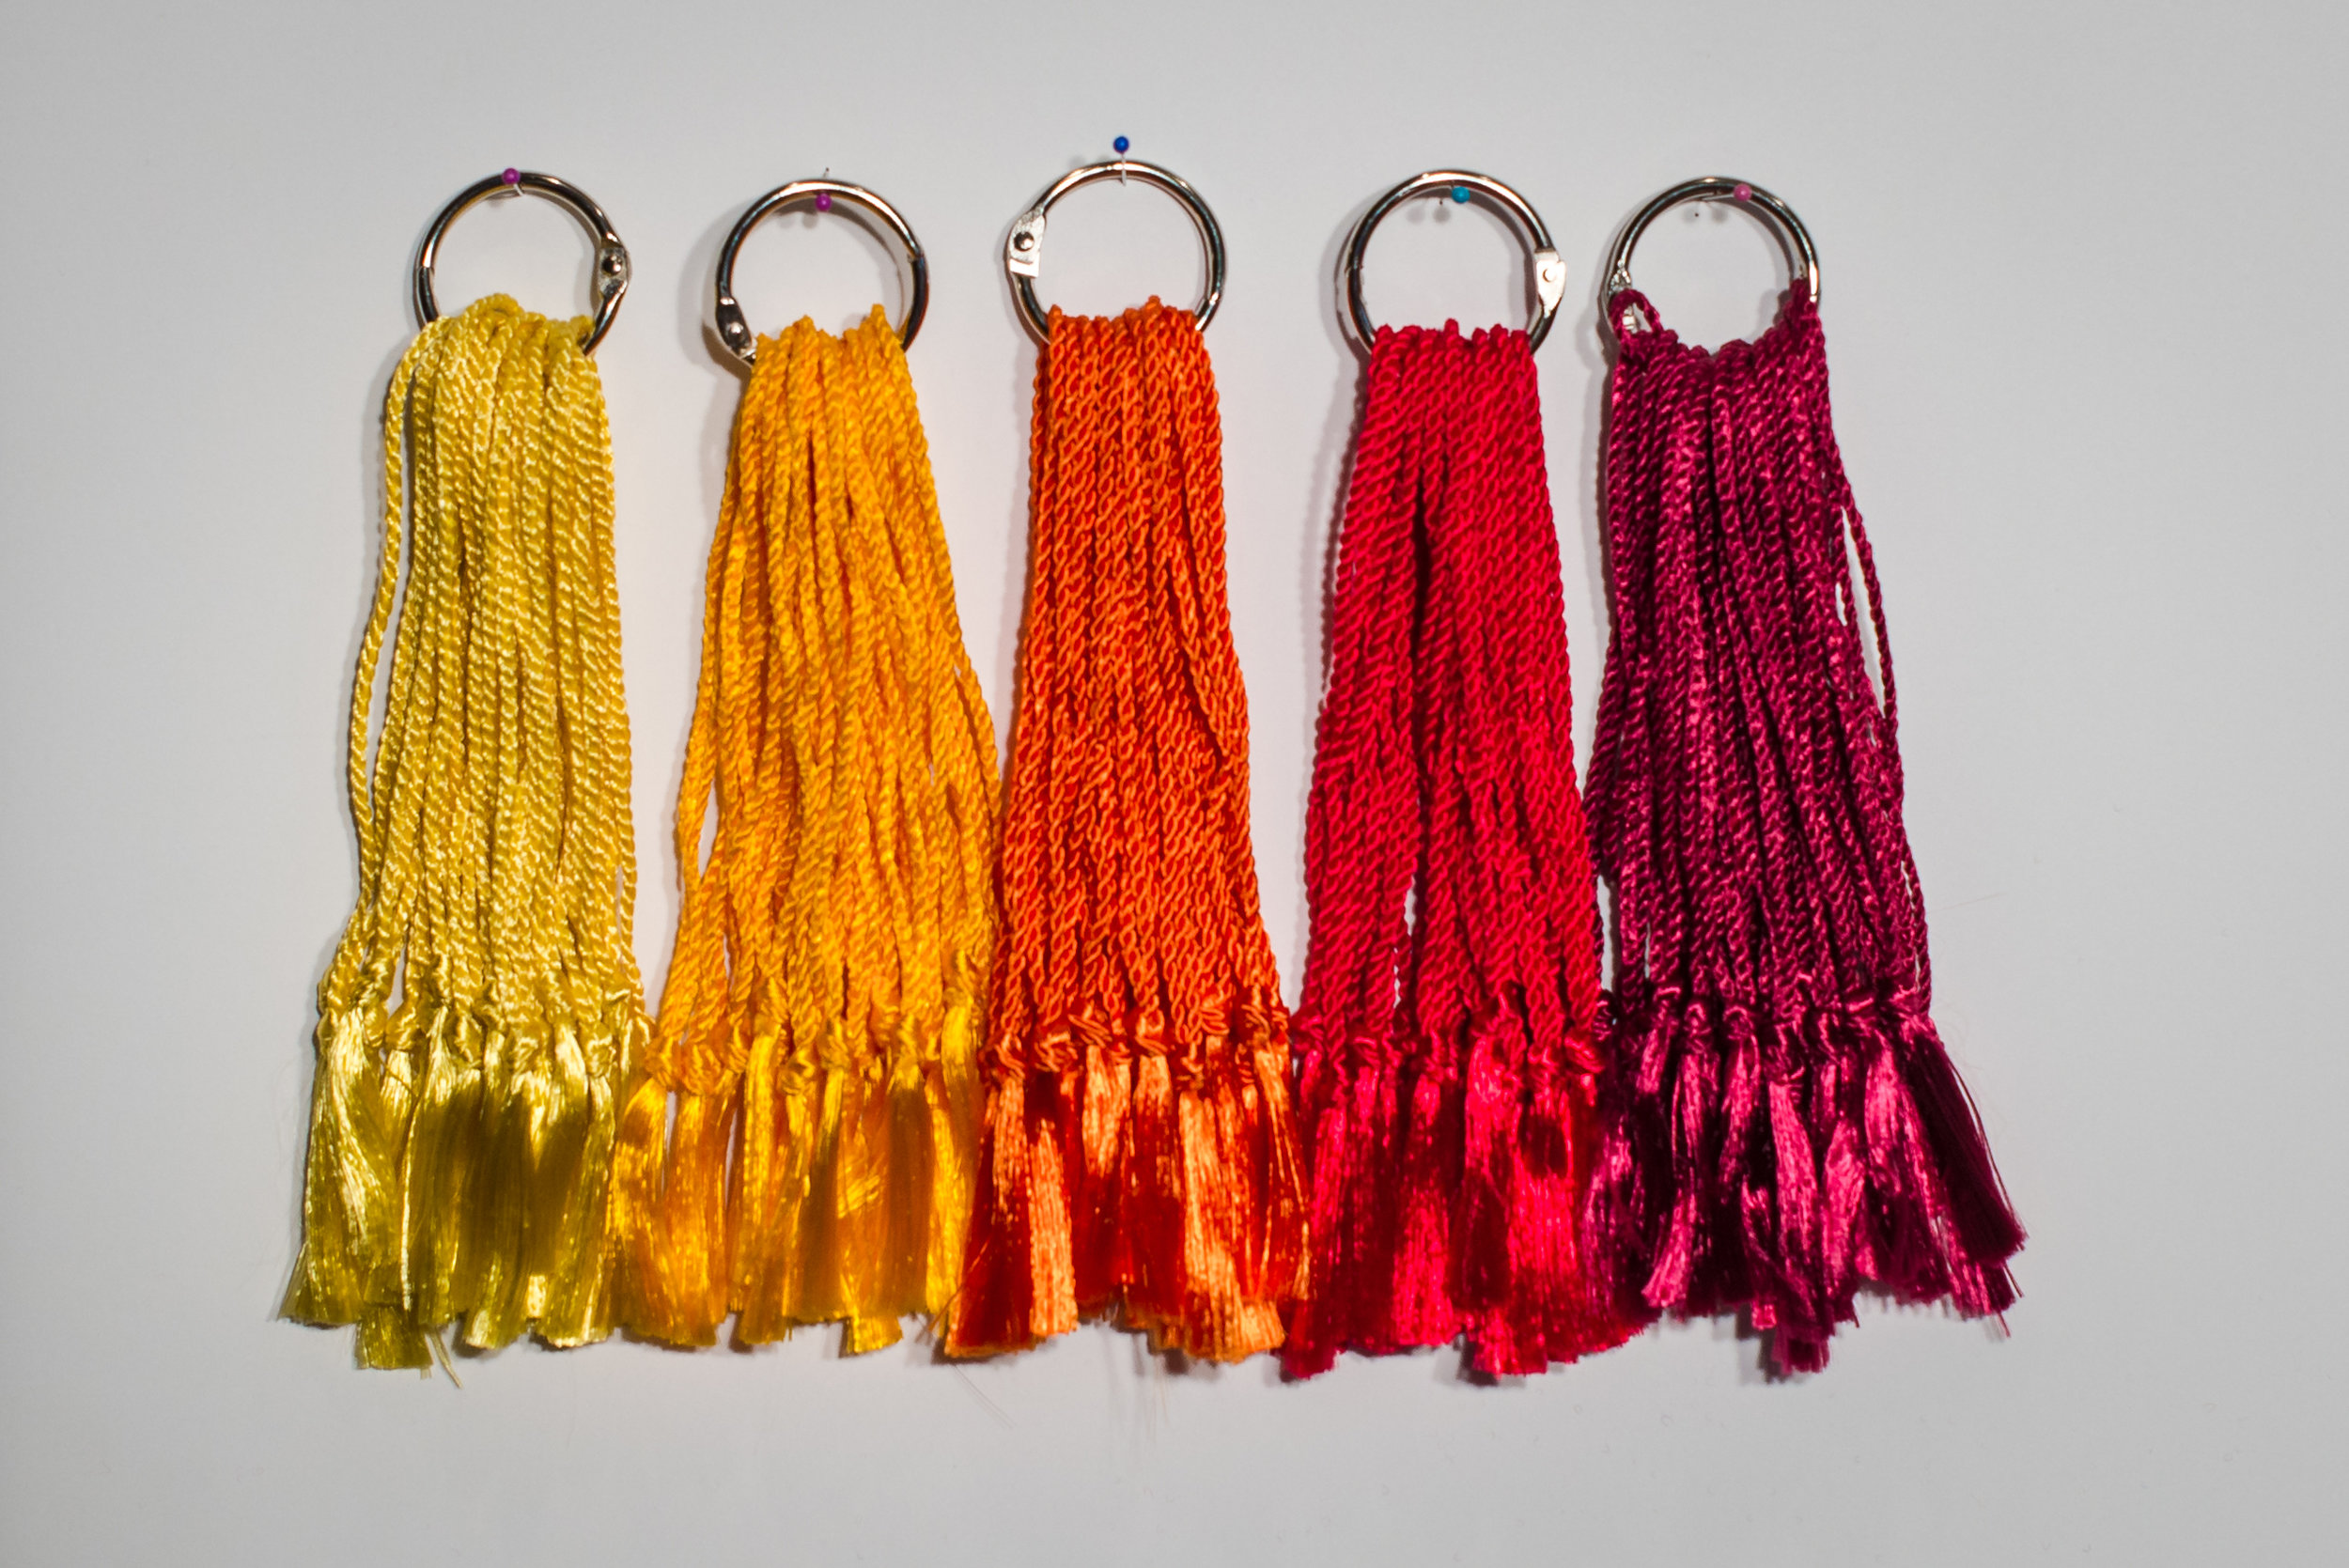 qbodp 10 Pieces Tassels Bulk,14cm Long Tassel Hanging Ornament,Handmade  Craft Tassels for Bookmarks,Keychain,Gift Tag,Crafts and Jewelry  Making,Light